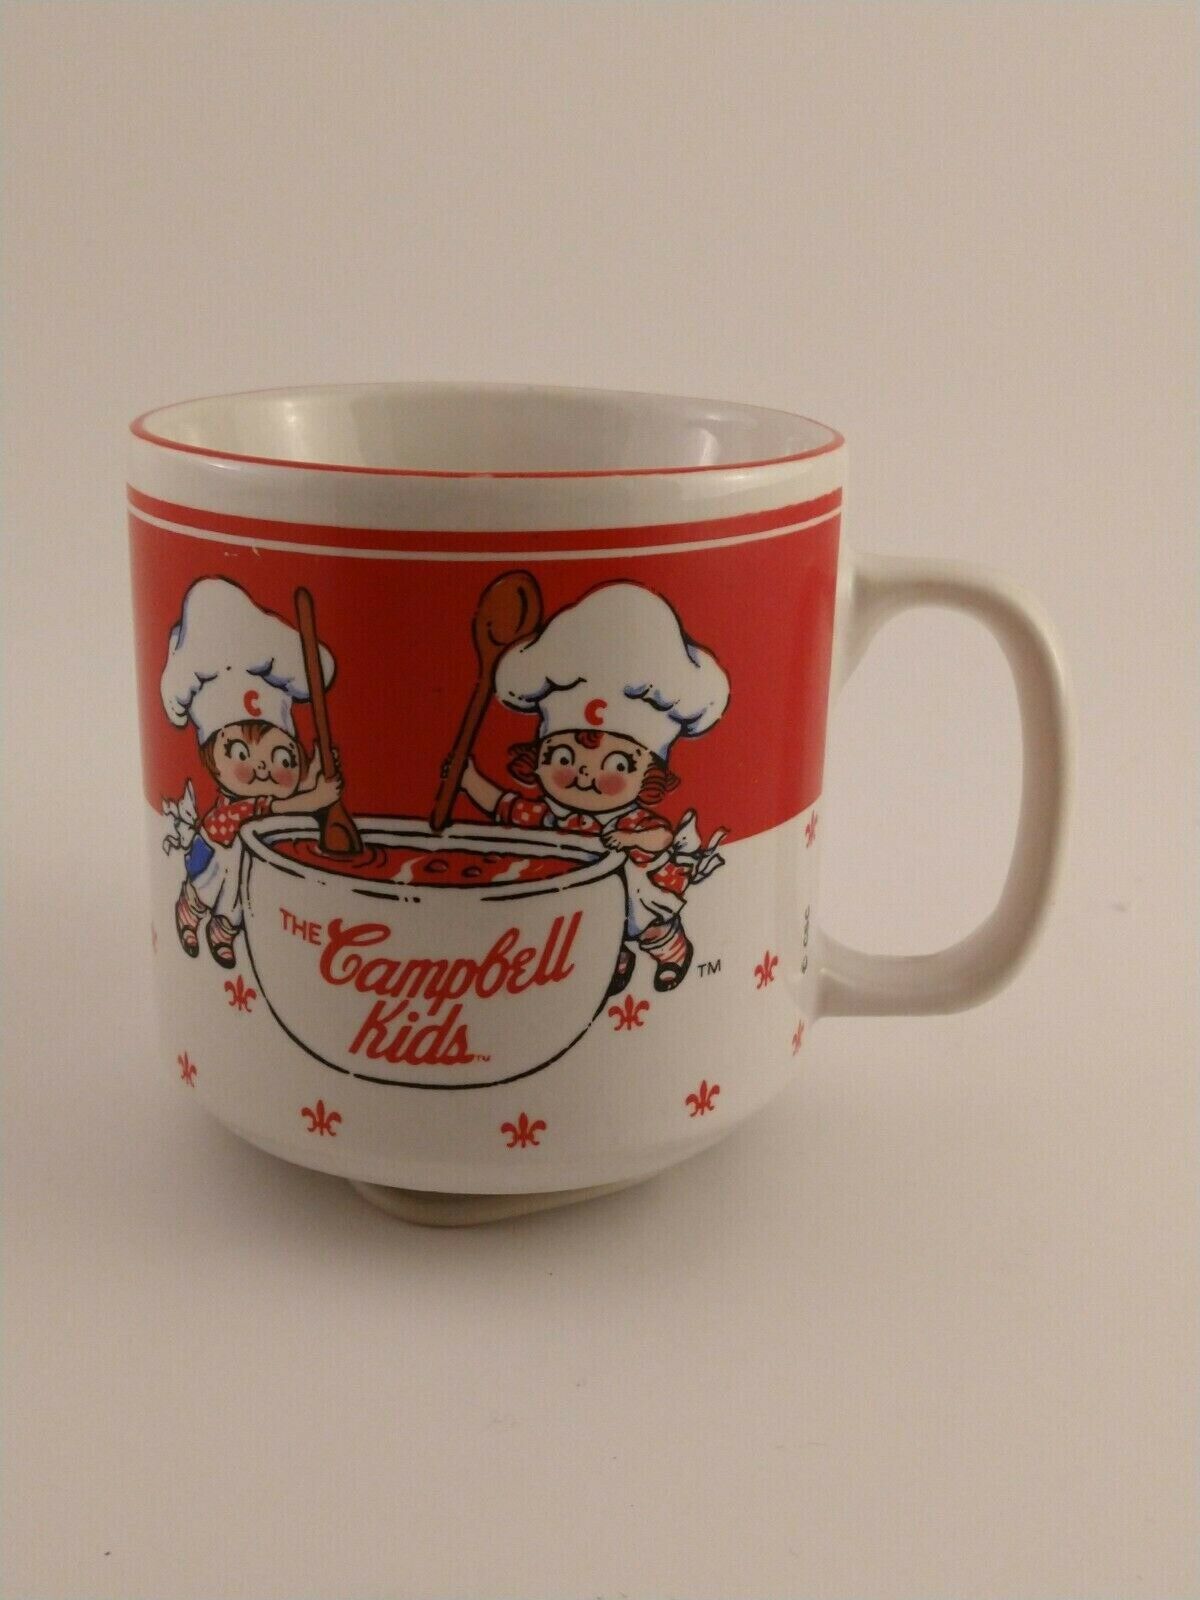 Primary image for Vintage Campbell Kids Coffee Cup 3 1/2" Campbell's Kid Mug Collectable Mug 1991